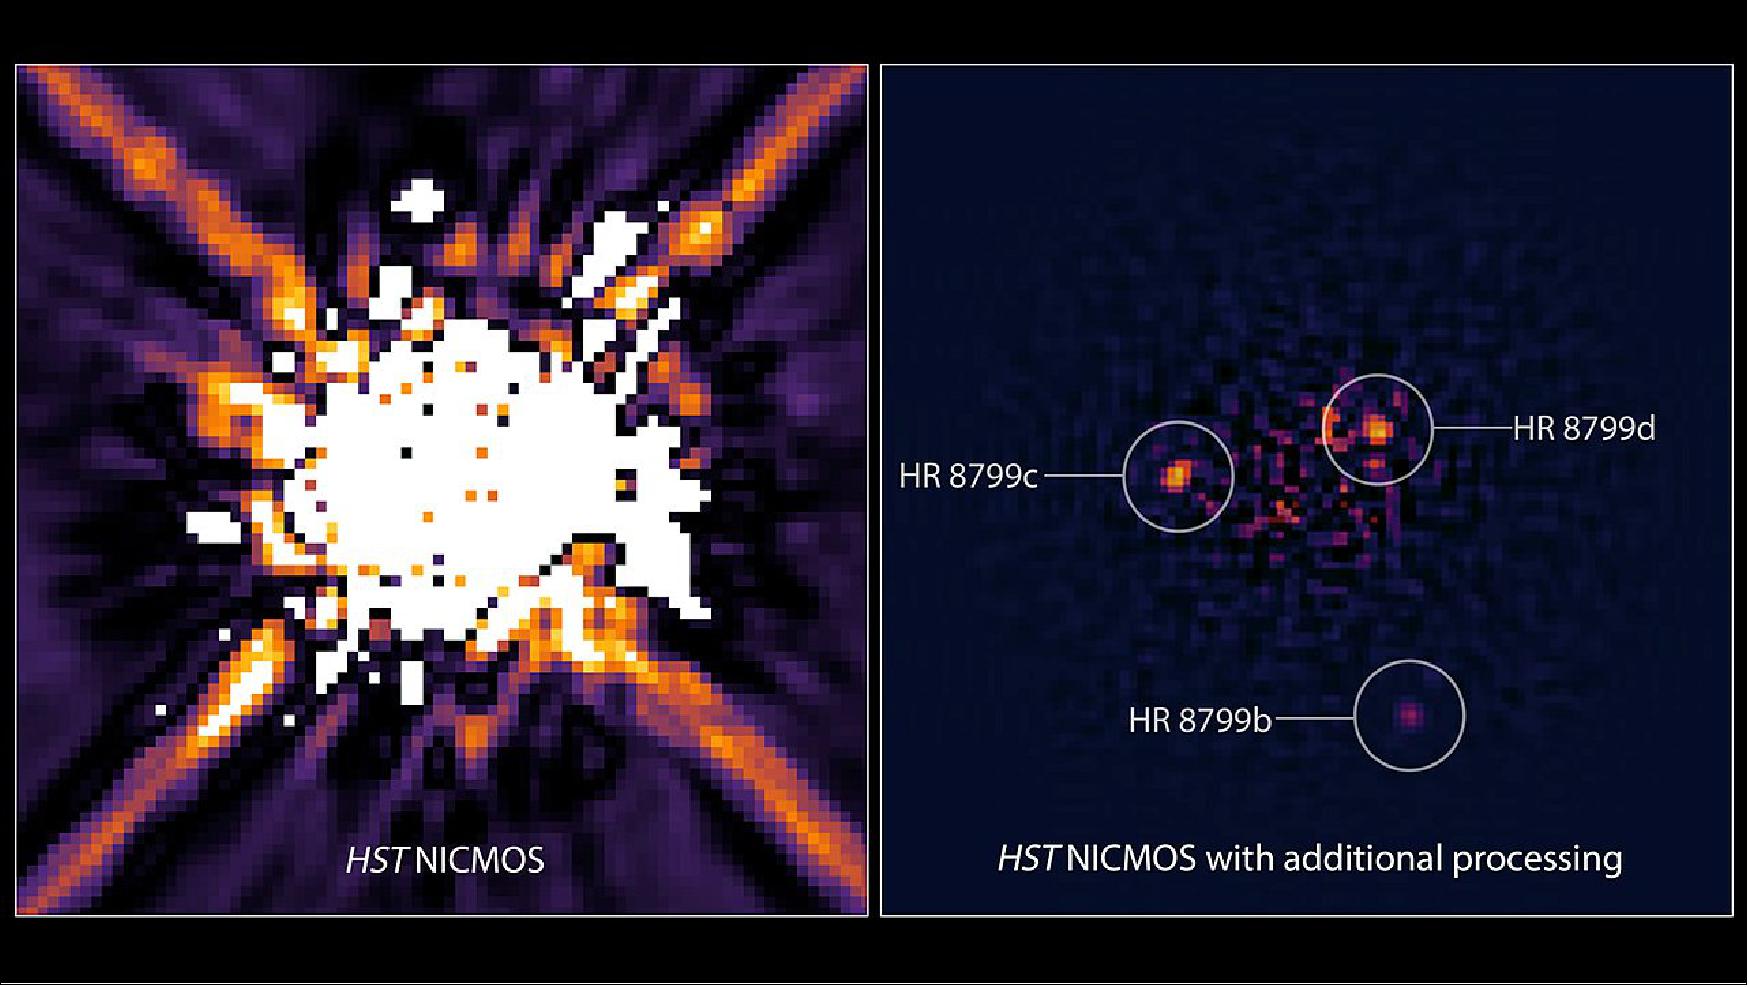 Figure 17: Left: This is an image of the star HR 8799 taken by Hubble's Near Infrared Camera and Multi-Object Spectrometer (NICMOS) in 1998. A mask within the camera (coronagraph) blocks most of the light from the star. Astronomers also used software to digitally subtract more starlight. Nevertheless, scattered light from HR 8799 dominates the image, obscuring the four faint planets. The exoplanets were discovered in 2007, 2008, and 2010 in near-infrared ground-based images taken with the W.M. Keck Observatory in Hawaii and the Gemini North telescope in Chile. The system is 133 light-years from Earth. Right: A re-analysis of NICMOS data in 2011 uncovered three of the exoplanets, which were not seen in the 1998 images. Sophisticated software processing of the NICMOS data removes most of the scattered starlight to reveal the three planets orbiting HR 8799. Astronomers used this decade-old image to calculate the planets’ orbits. The fourth, innermost planet cannot be seen because it is on the edge of the NICMOS coronagraphic spot that blocks the light from the central star. Webb will probe the planets’ atmospheres at infrared wavelengths astronomers have rarely used to image distant worlds. Webb will also hunt for other distant worlds—possibly down to Saturn-size—on the outskirts of planetary systems that cannot be detected with ground-based telescopes [image credit: NASA, ESA, Rémi Soummer (STScI)]